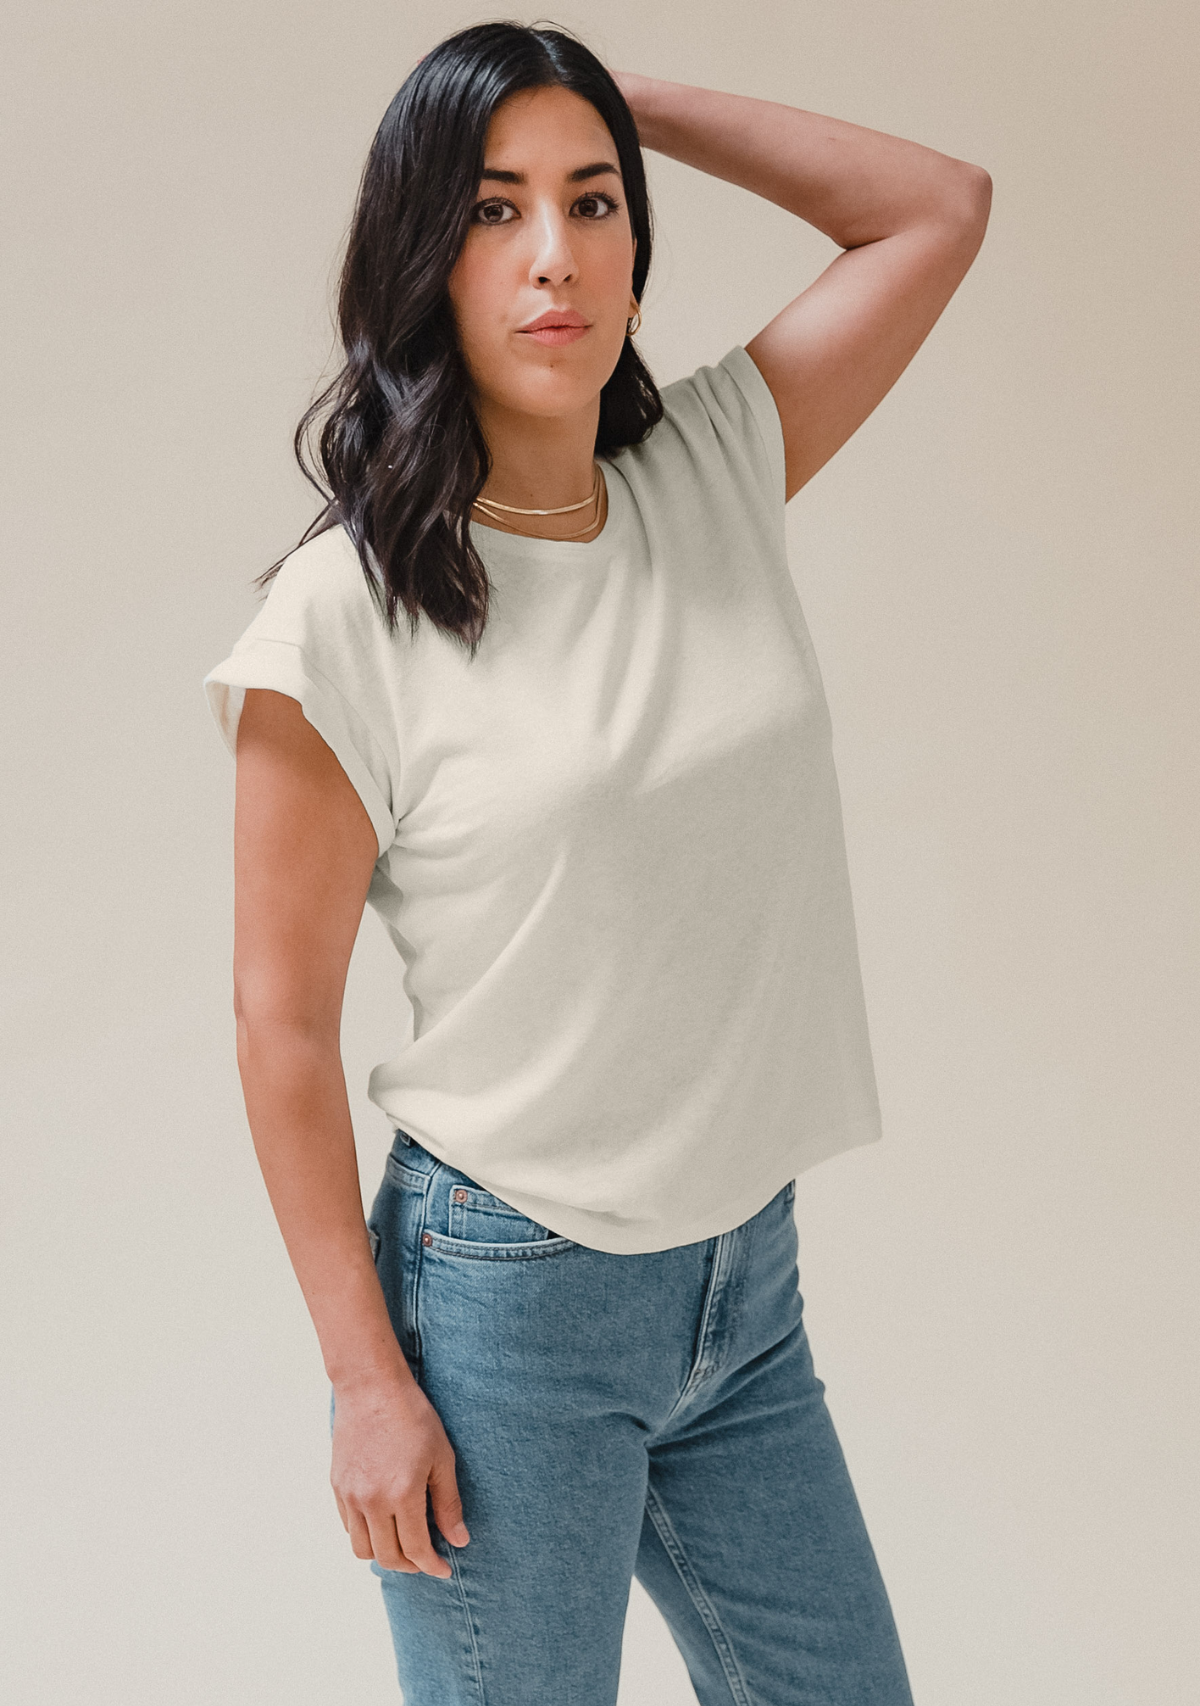 Women's T-shirt bundle sizes XS-3X. Made from a blend of Hemp and Organic Cotton Jersey, you get the best of both worlds with the durability of hemp and breathability of soft cotton. 